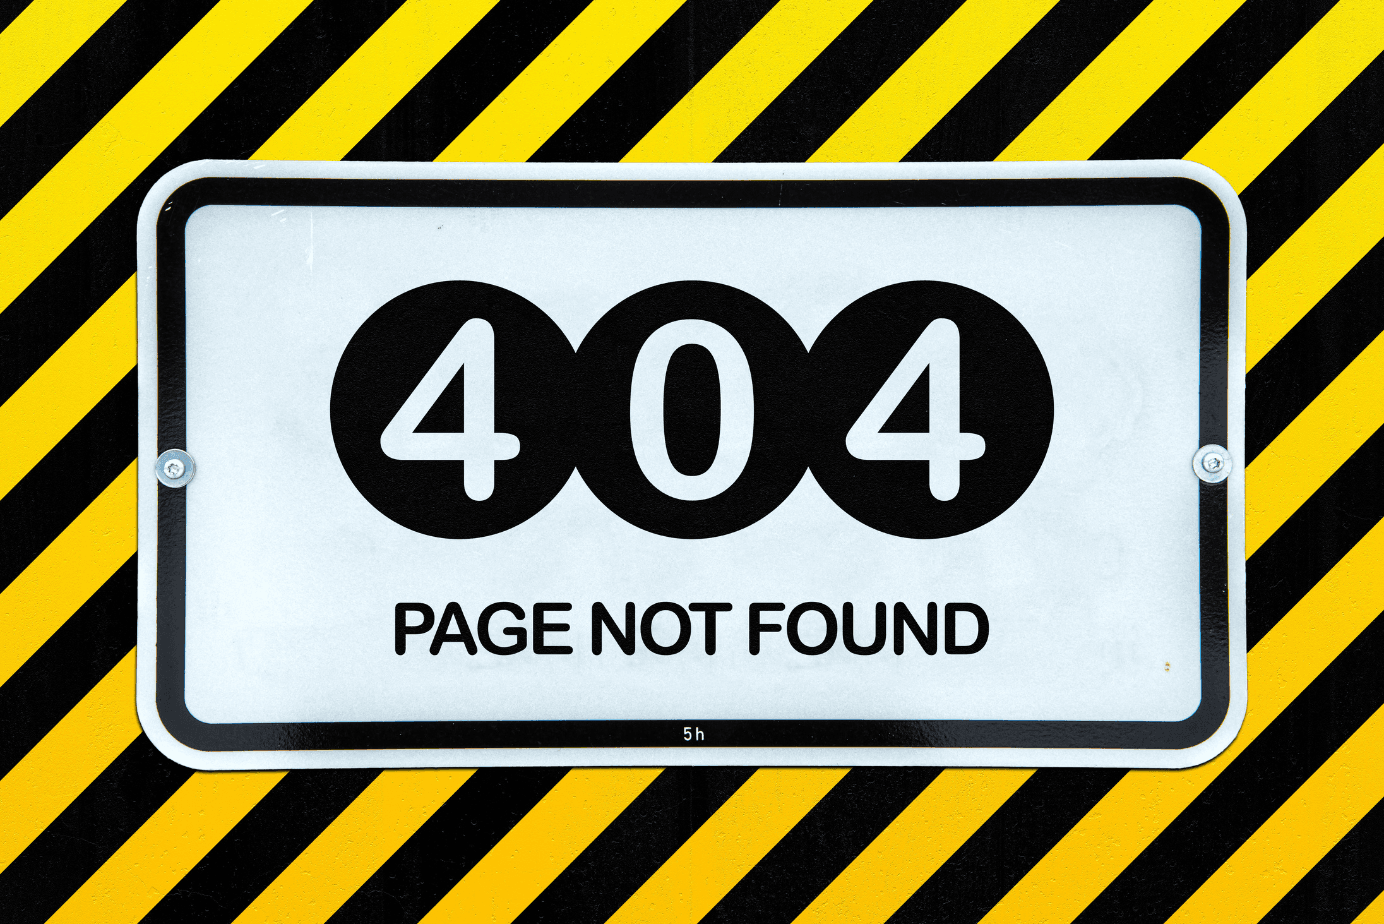 A 404 page error sign on a black and yellow background.